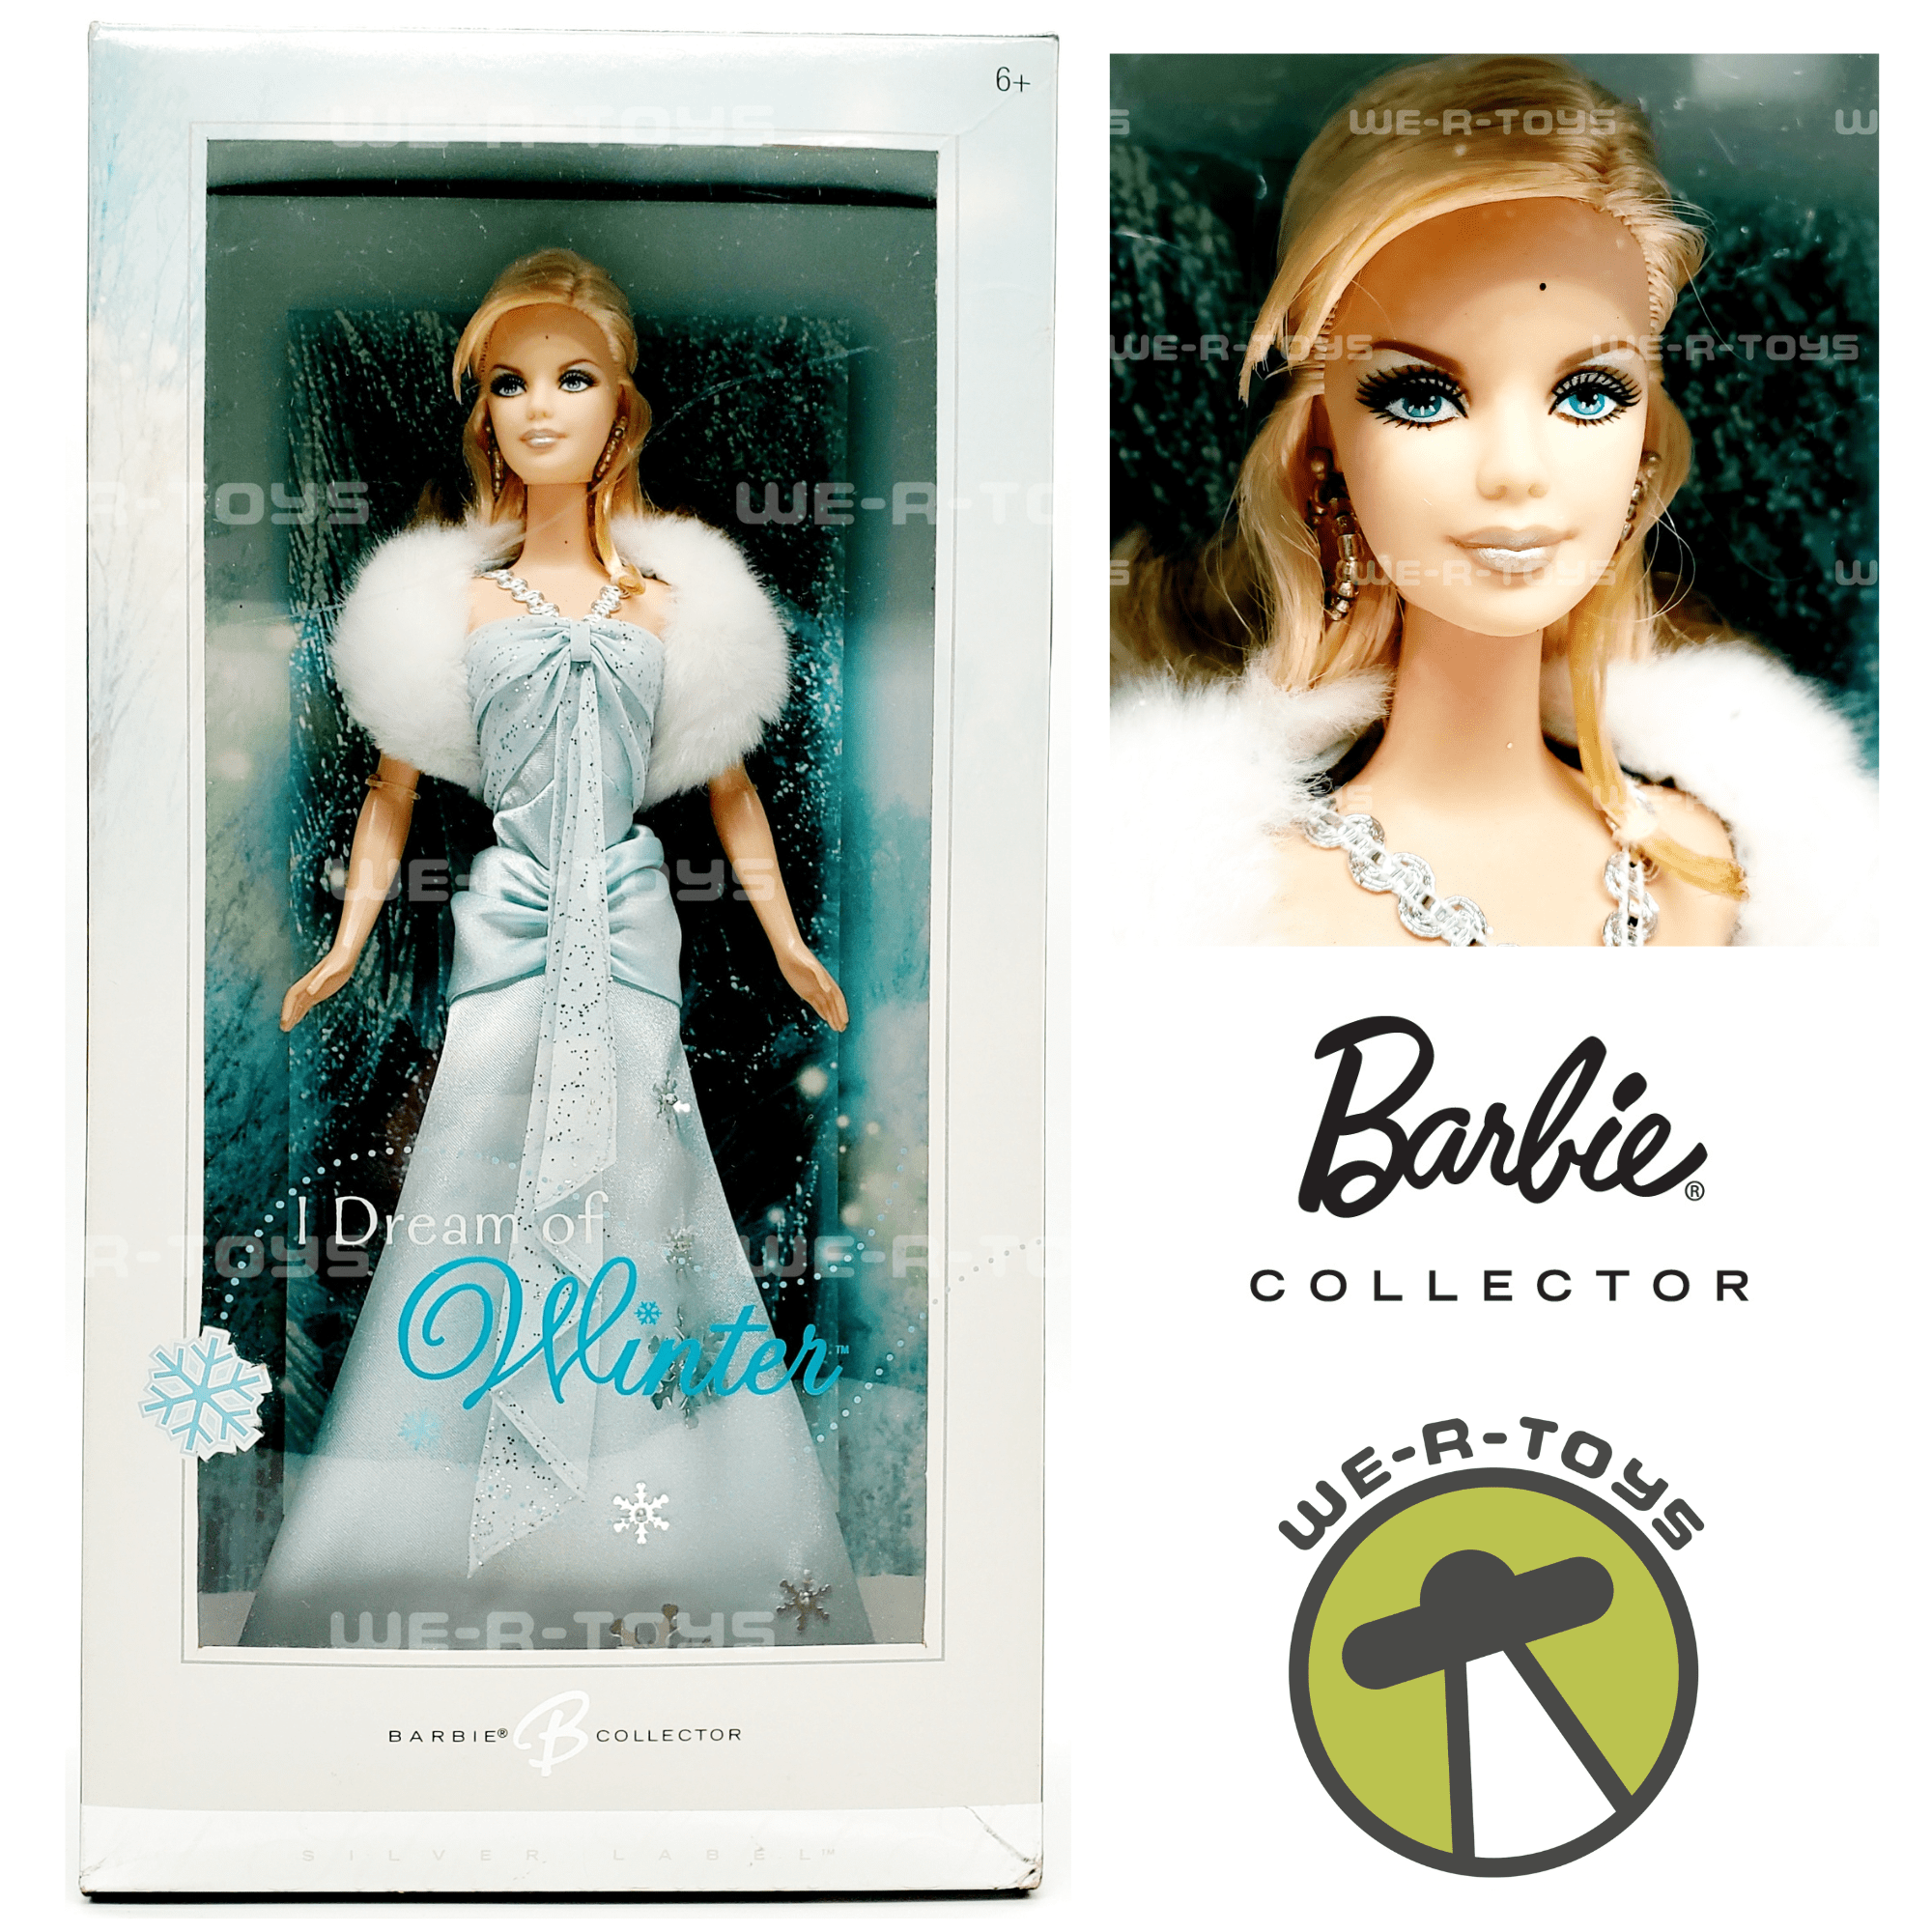 Barbie Collector Peppermint Obsession Barbie Doll 2005 Mattel J1743